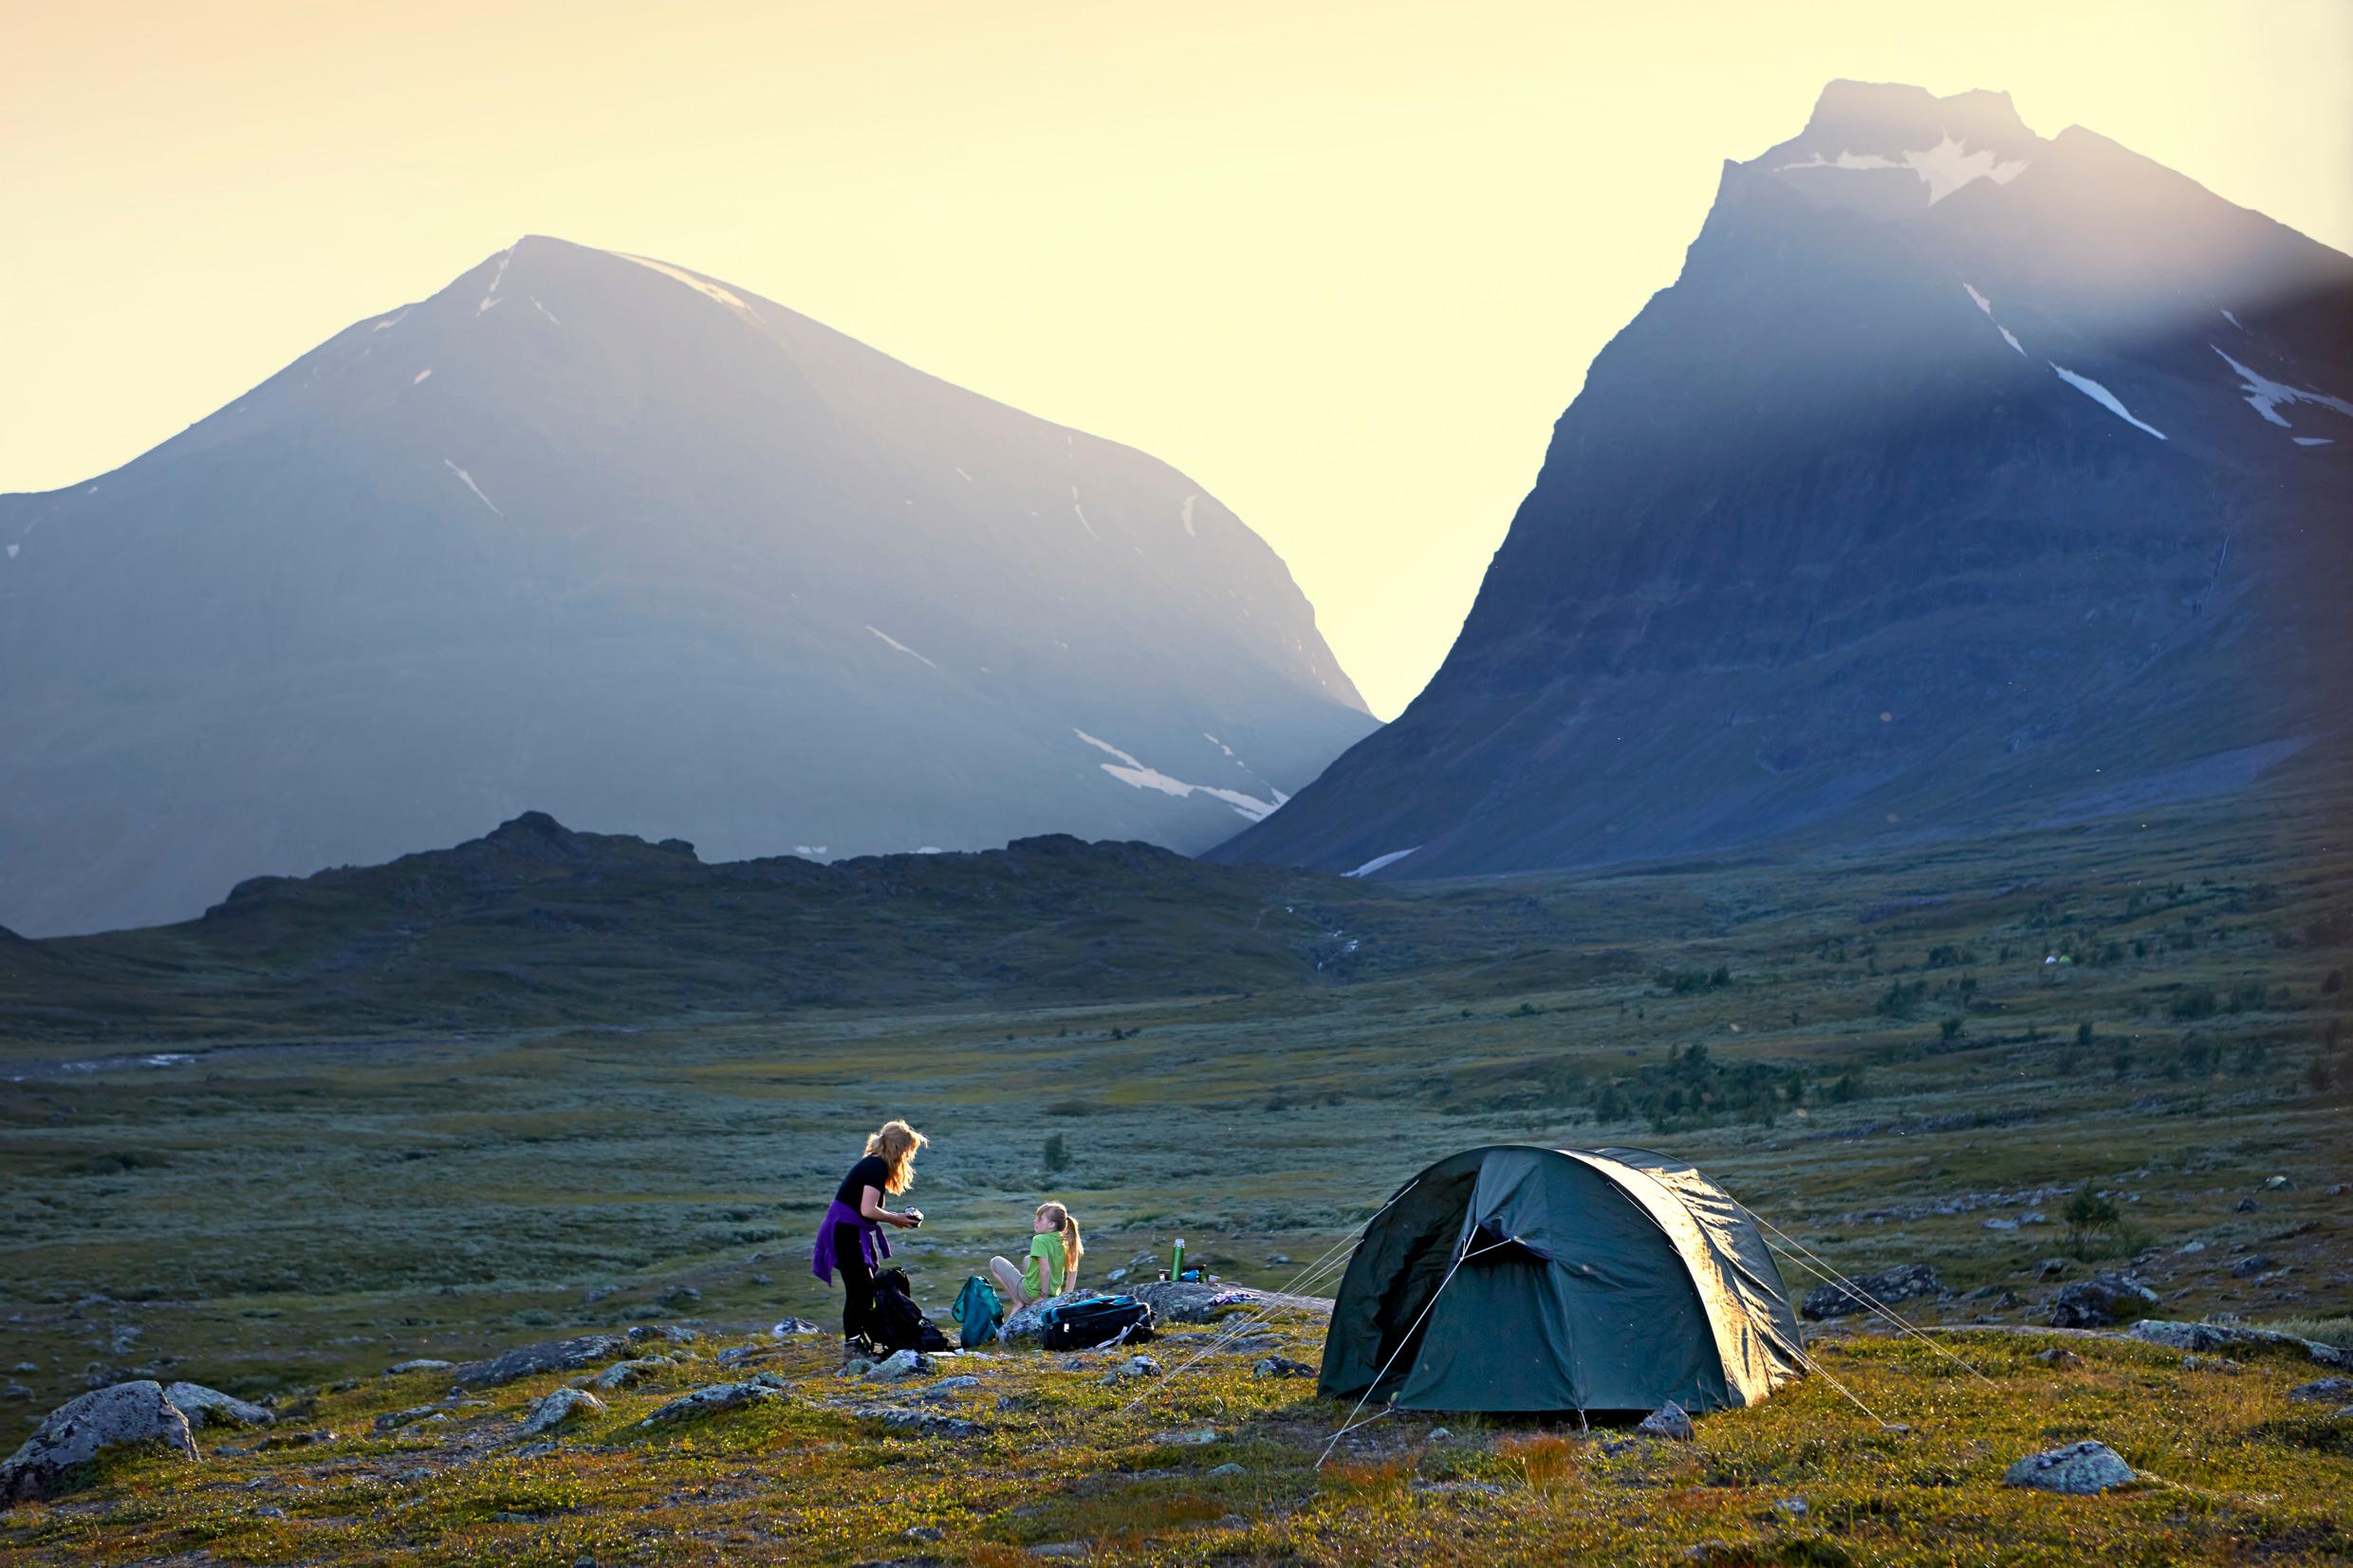 Two people next to a tent, with tall mountains in the background.